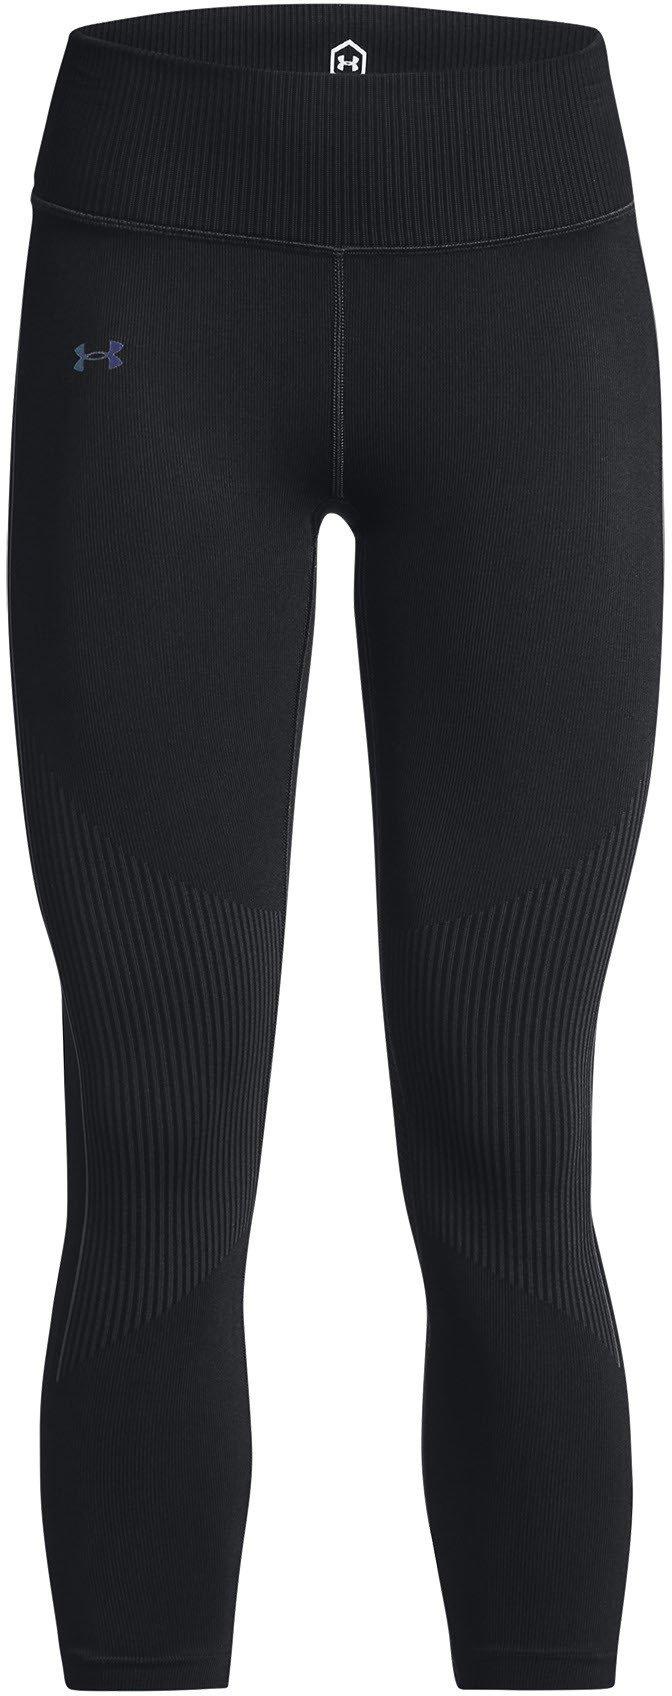 Under Armour Rush Seamless Ankle Leg-BLK XS